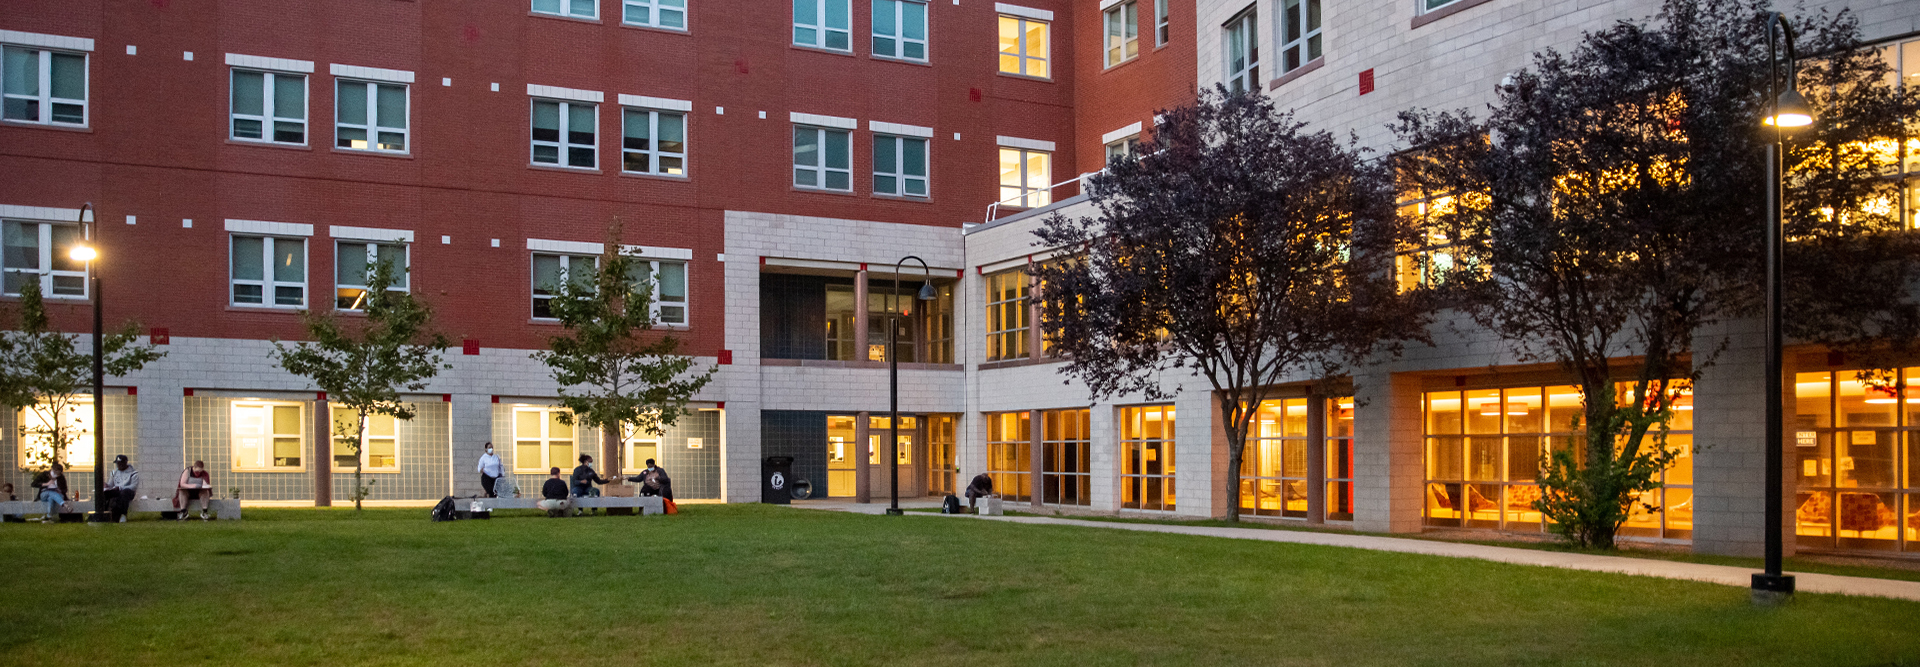 outside on campus at dusk